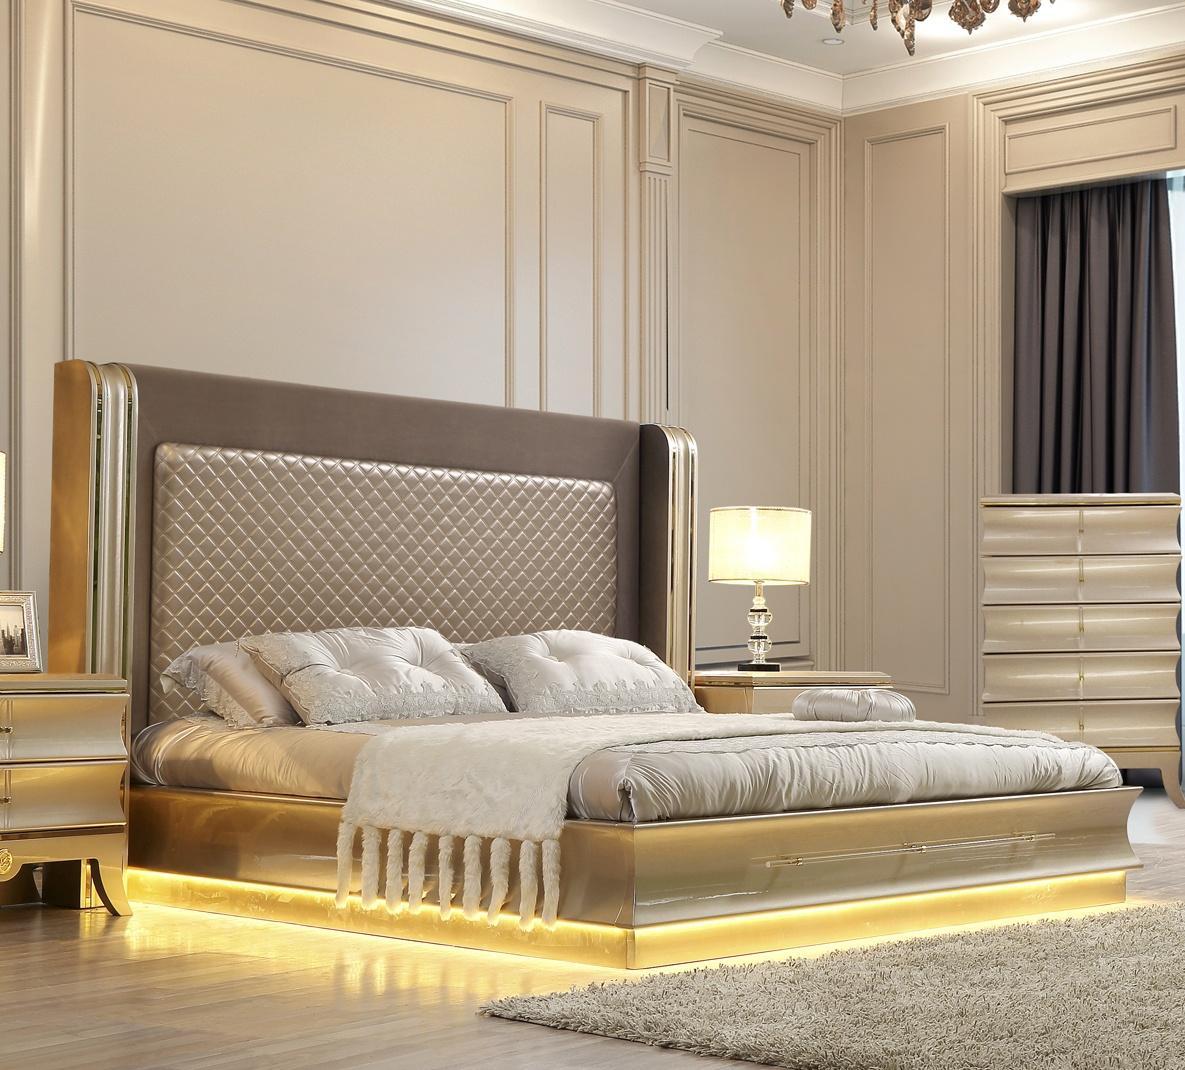 

    
Glam Belle Silver & Gold King Bedroom Set 6Pcs Contemporary Homey Design HD-925
